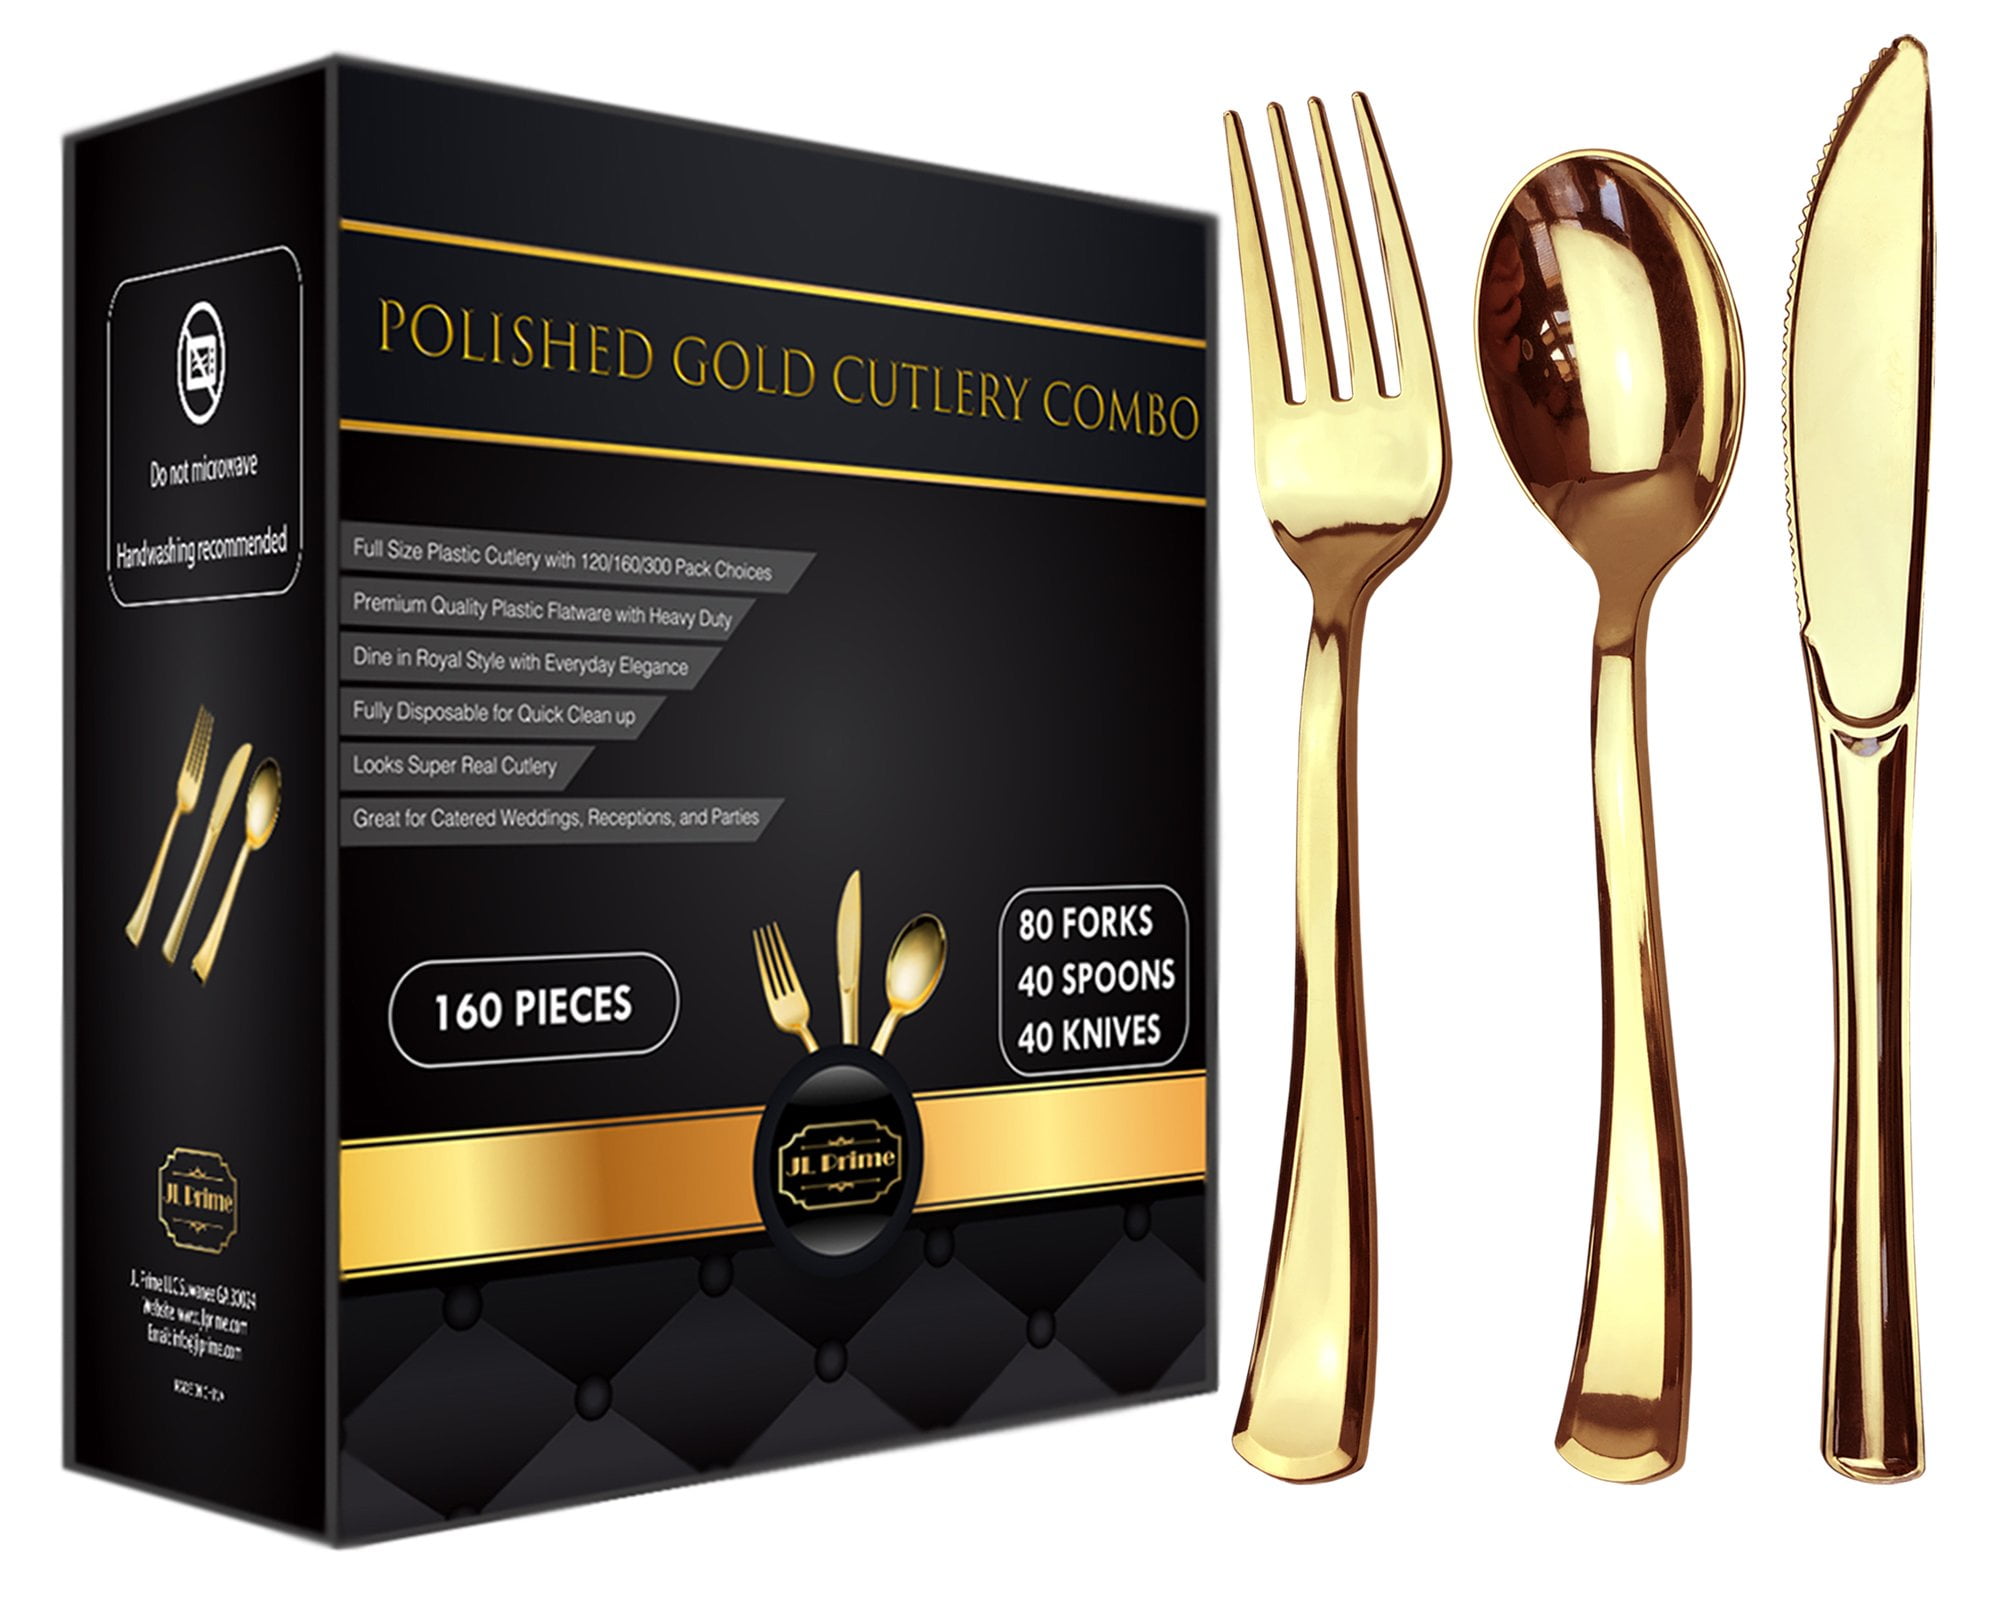 100 Silver Plastic Forks Elegant and Disposable Shiny Silver Flatware Includes 100 Silver Hammered Design Forks Packaged In A Neat Box.